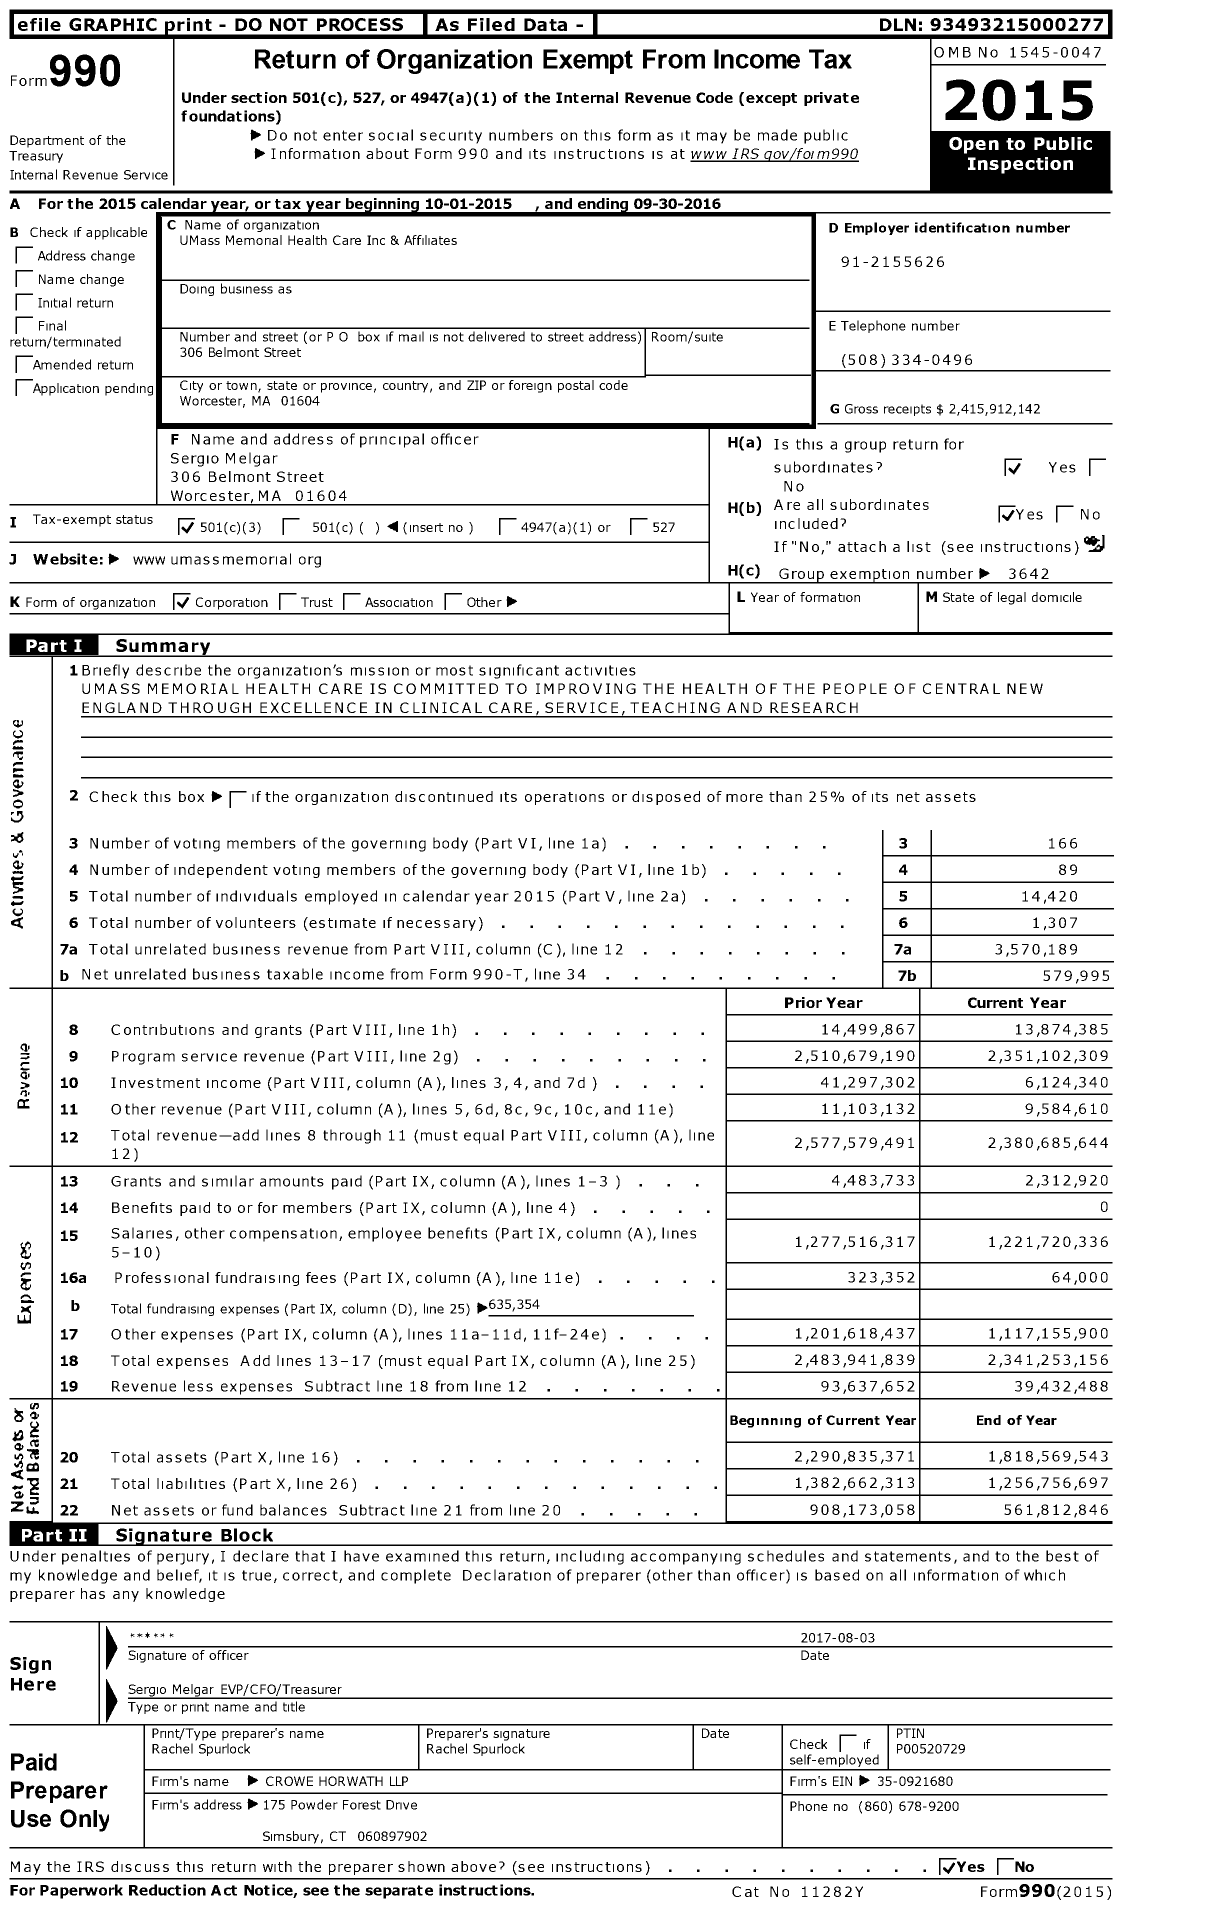 Image of first page of 2015 Form 990 for UMass Memorial Health Care Inc Affiliates